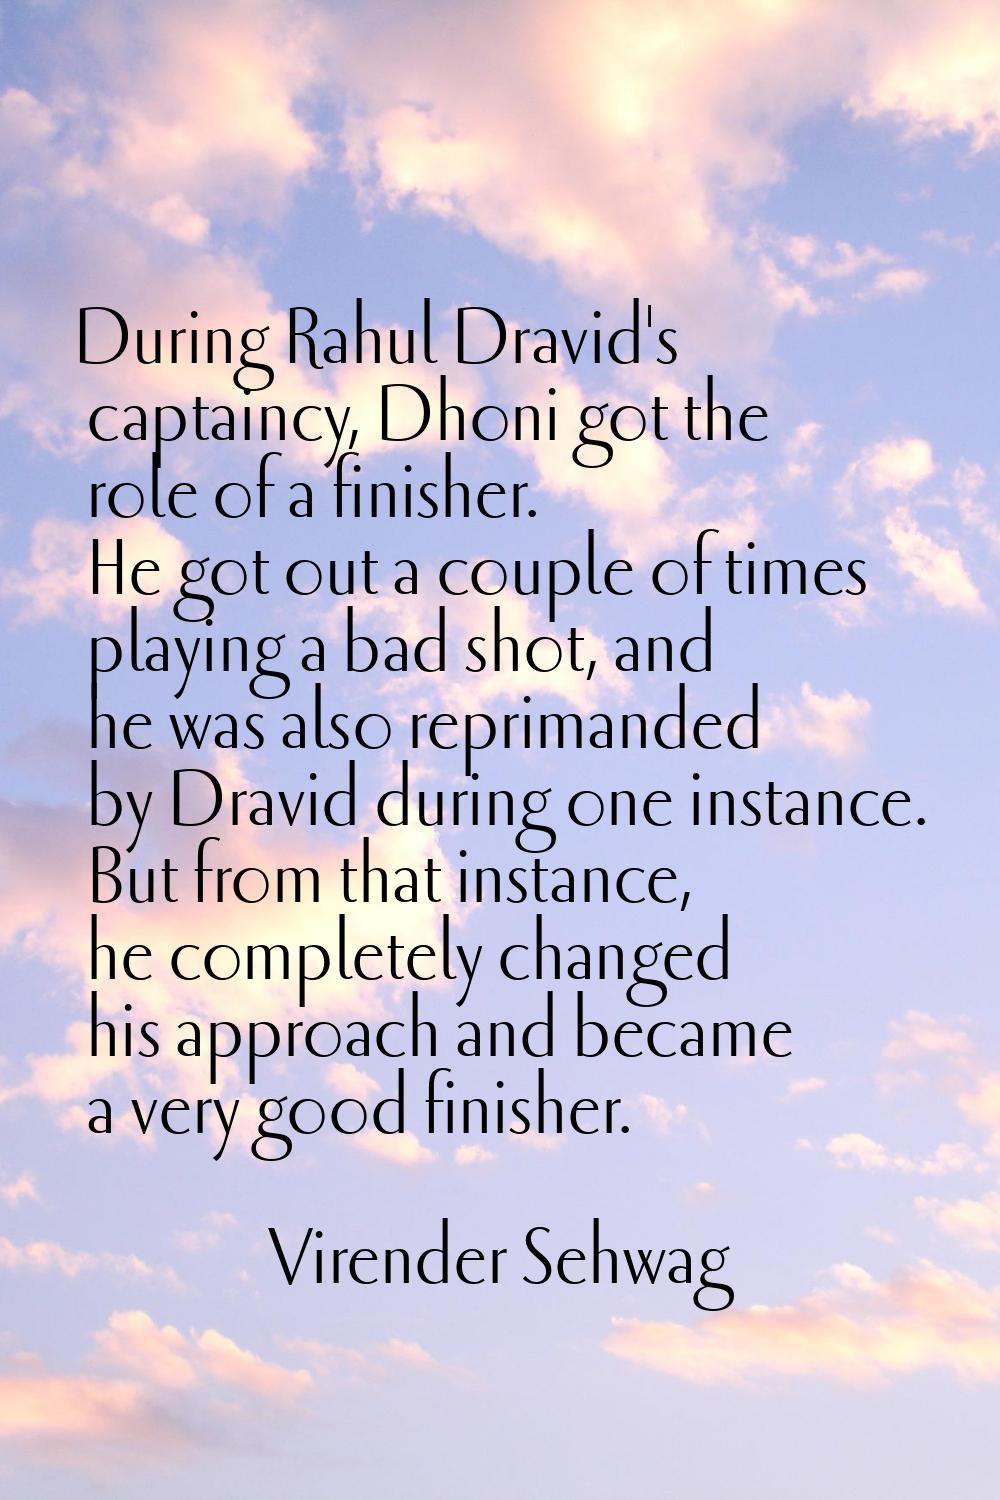 During Rahul Dravid's captaincy, Dhoni got the role of a finisher. He got out a couple of times pla